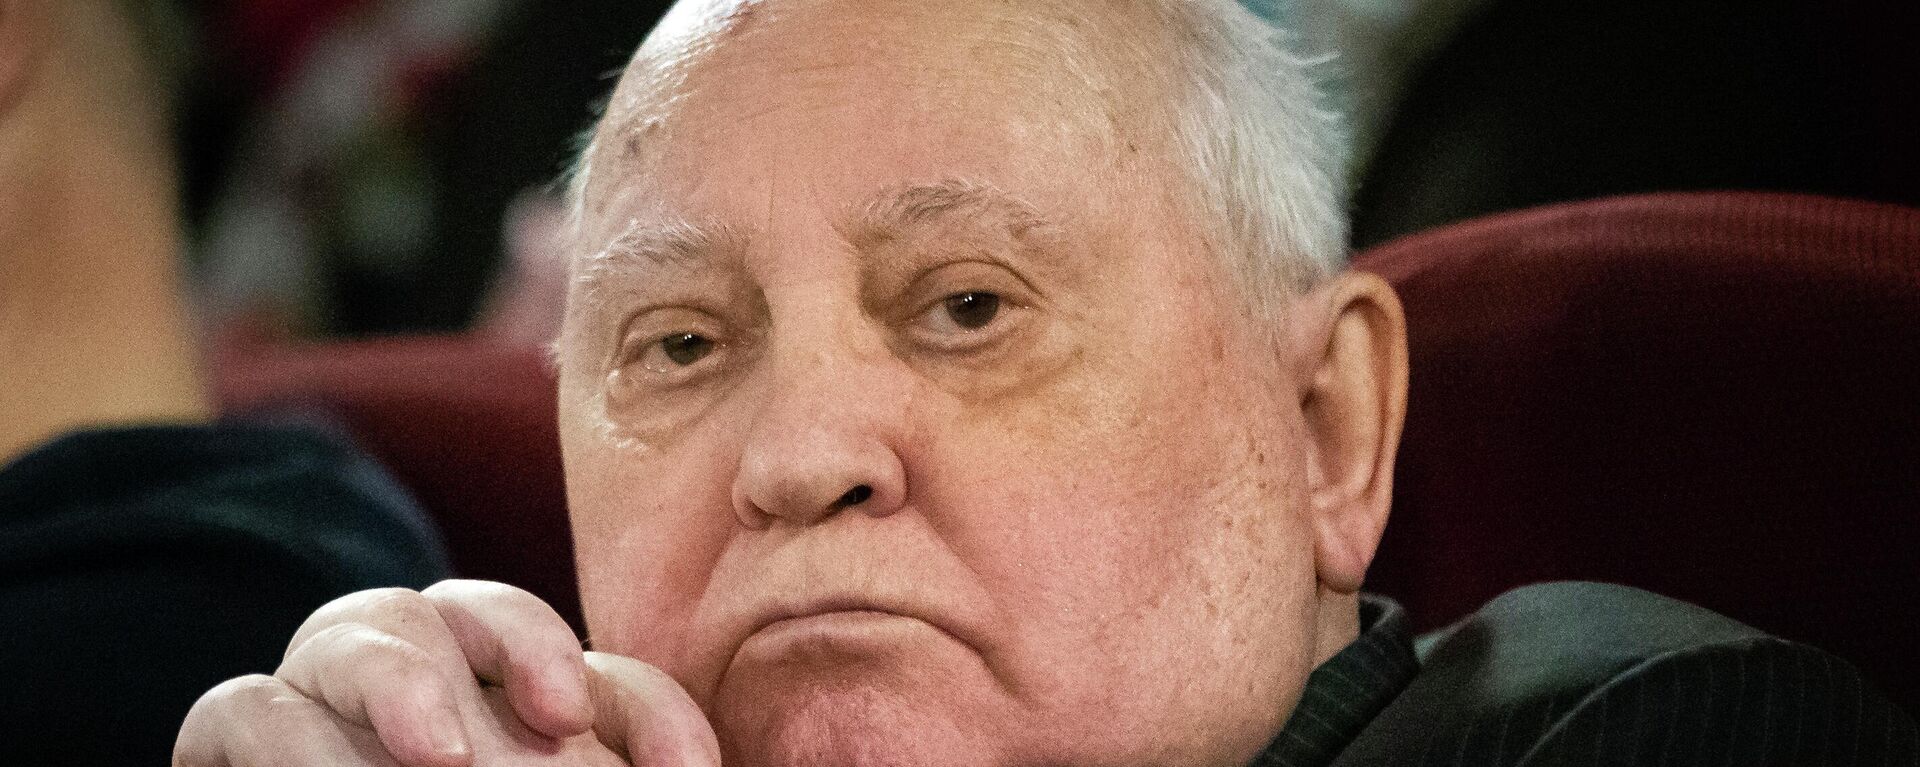 In this Thursday, Nov. 8, 2018 file photo, former Soviet leader Mikhail Gorbachev attends the Moscow premier of a film made by Werner Herzog and British filmmaker Andre Singer based on their conversations, in Moscow, Russia. - Sputnik Türkiye, 1920, 30.08.2022